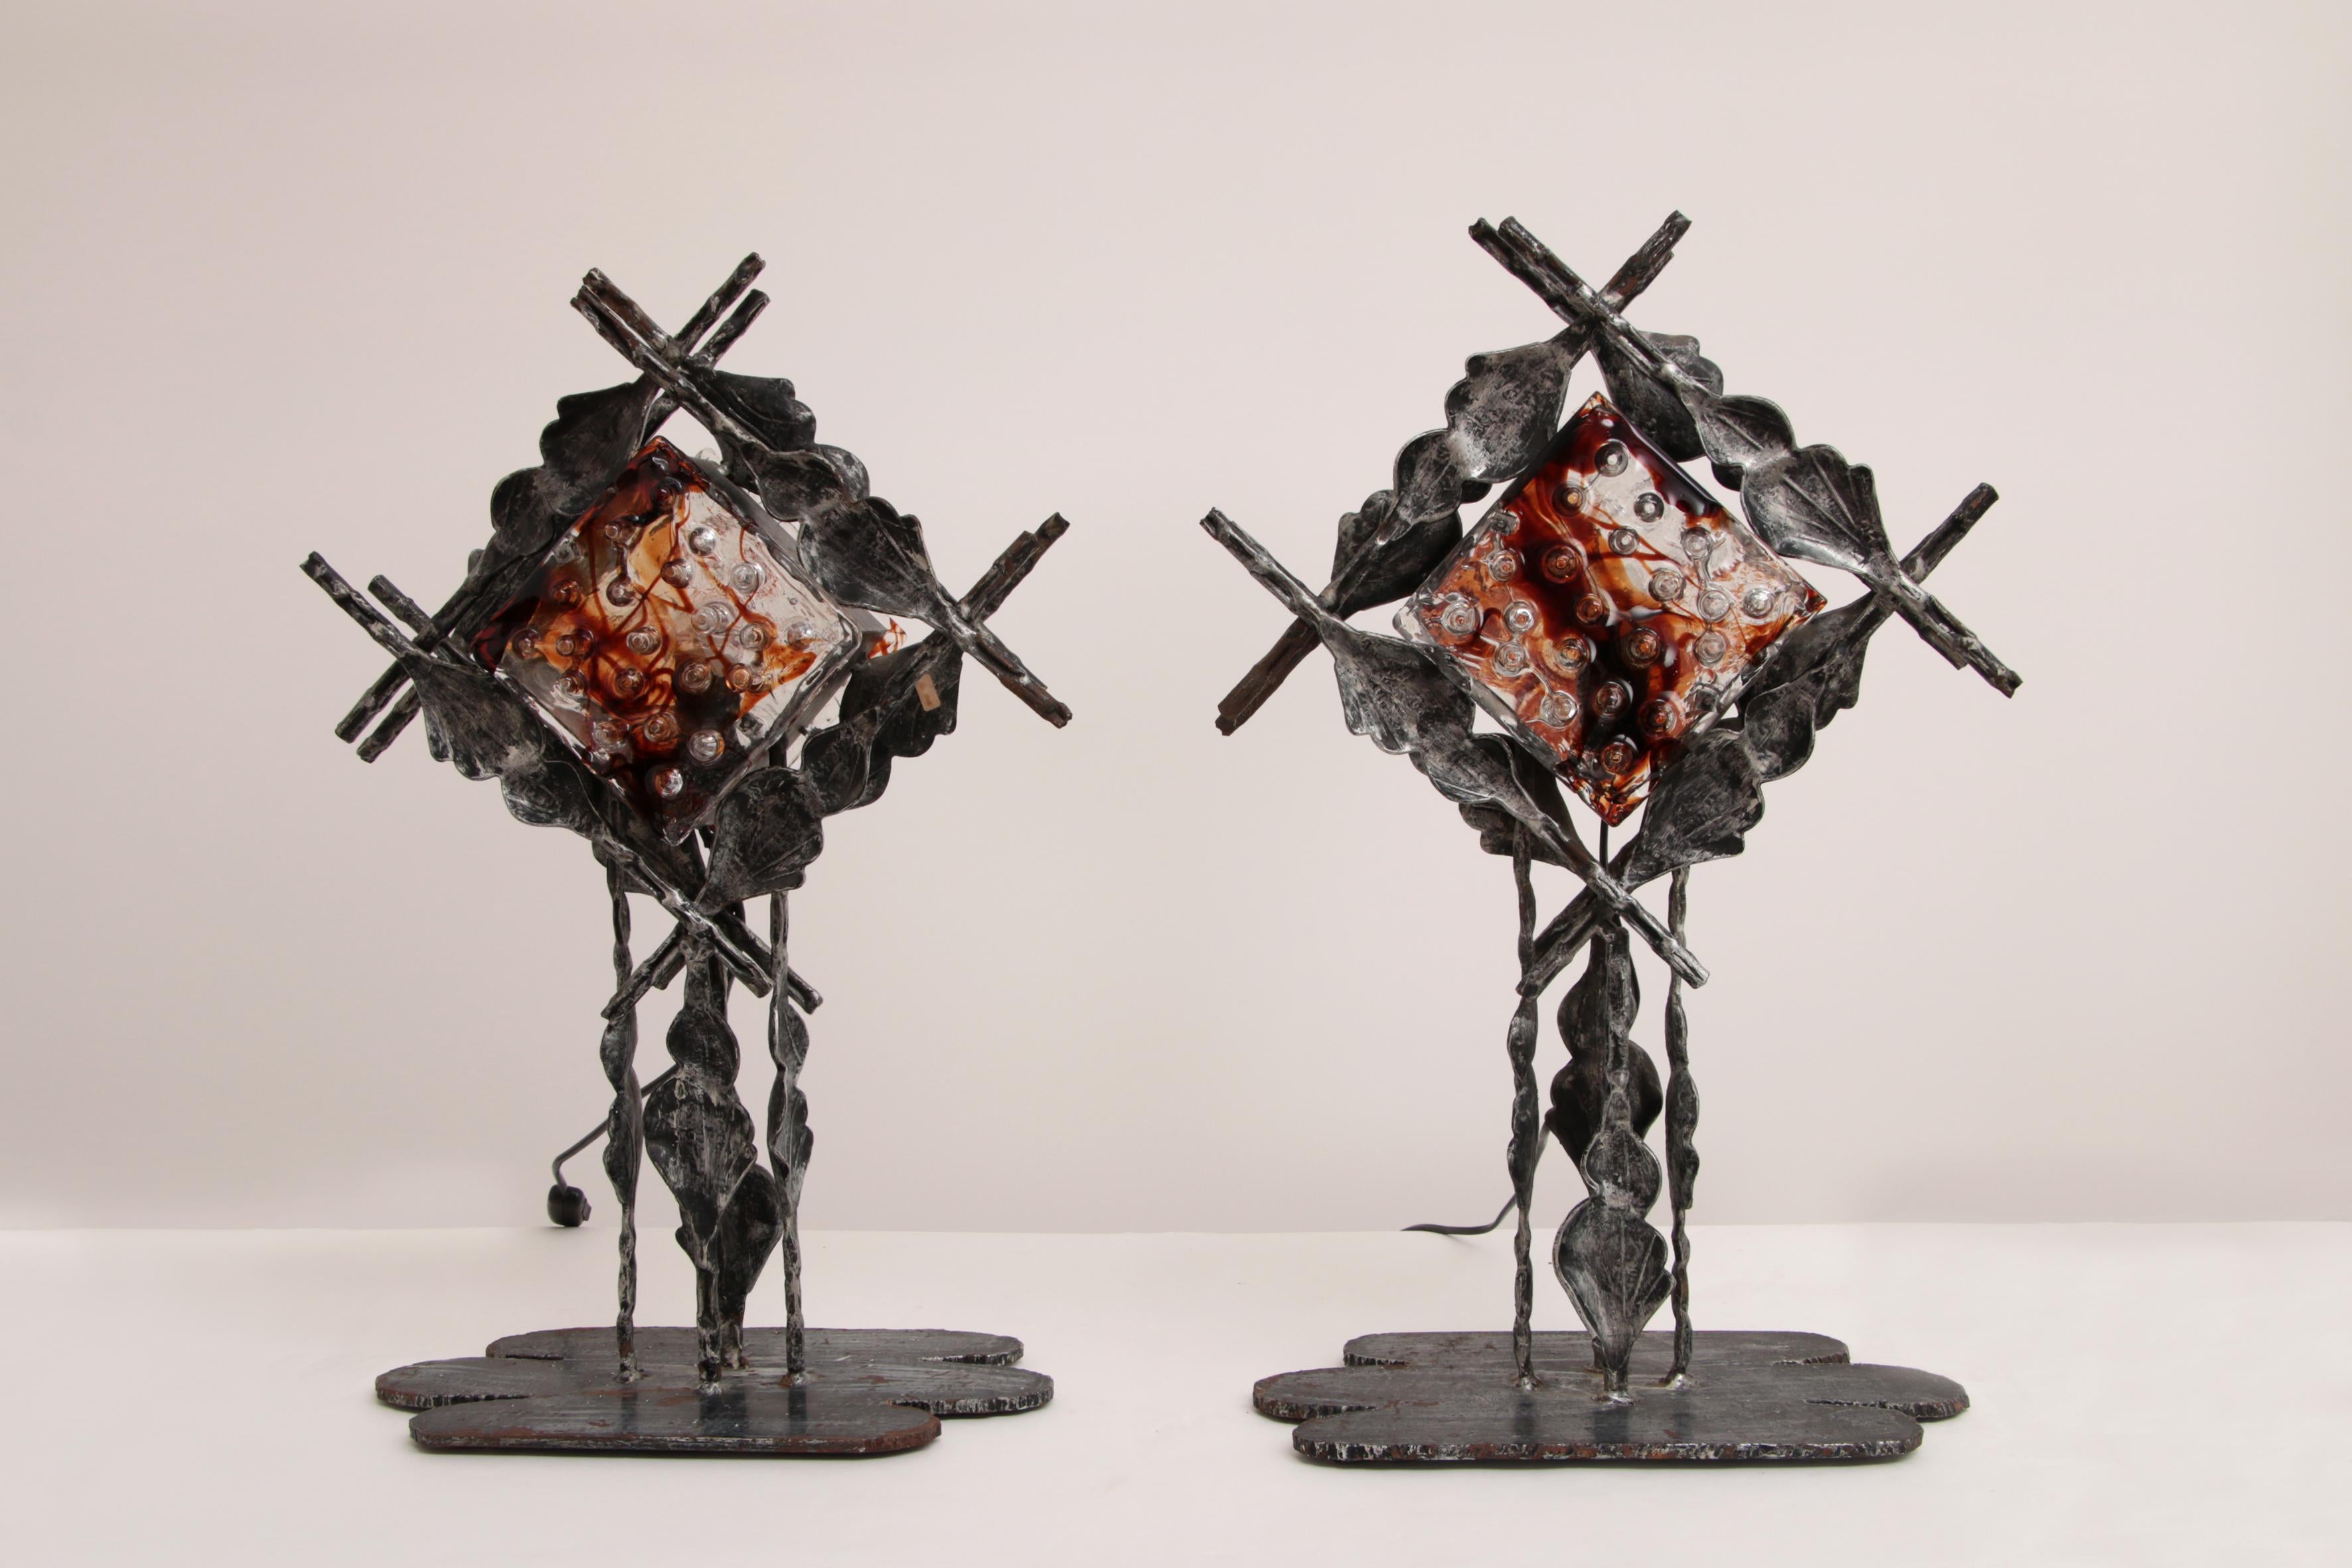 Italian Design Brutalist Table Lamps from Poliarte, Albano Poli, 1970s For Sale 11